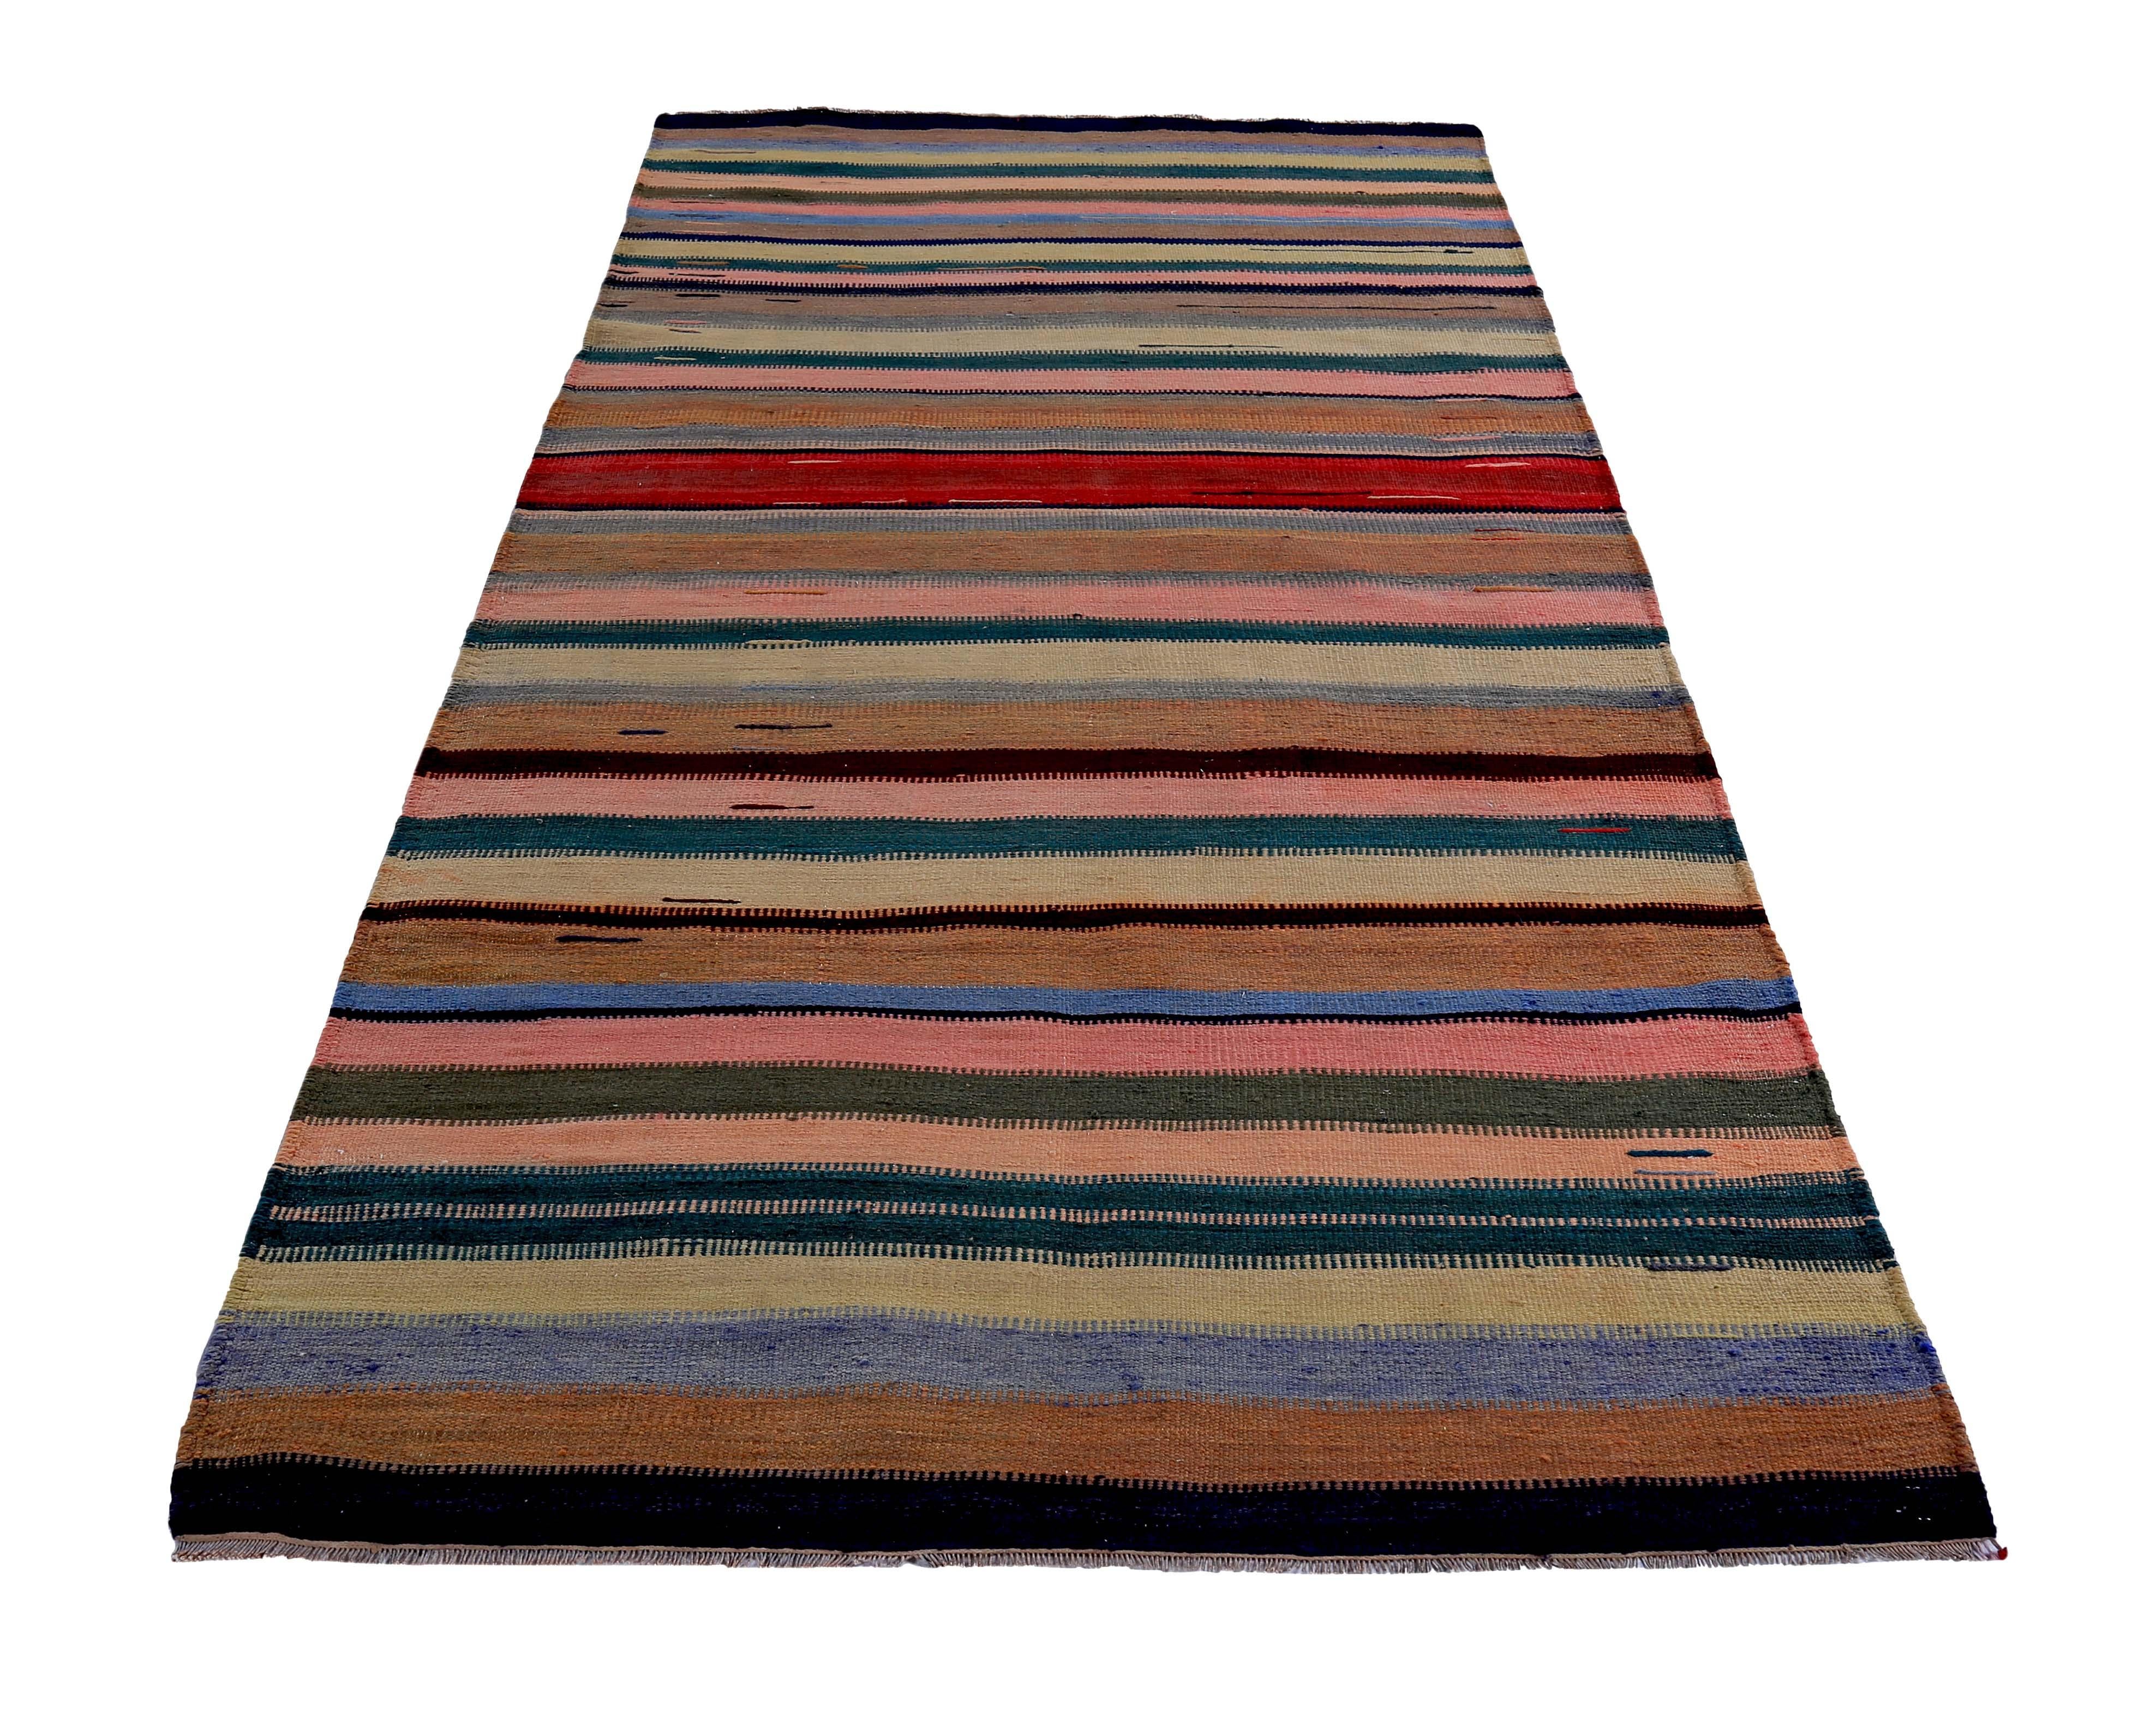 Contemporary Turkish rug handwoven from the finest sheep’s wool and colored with all-natural vegetable dyes that are safe for humans and pets. It’s a traditional Kilim flat-weave design featuring green, red and pink stripes on a black field. It’s a